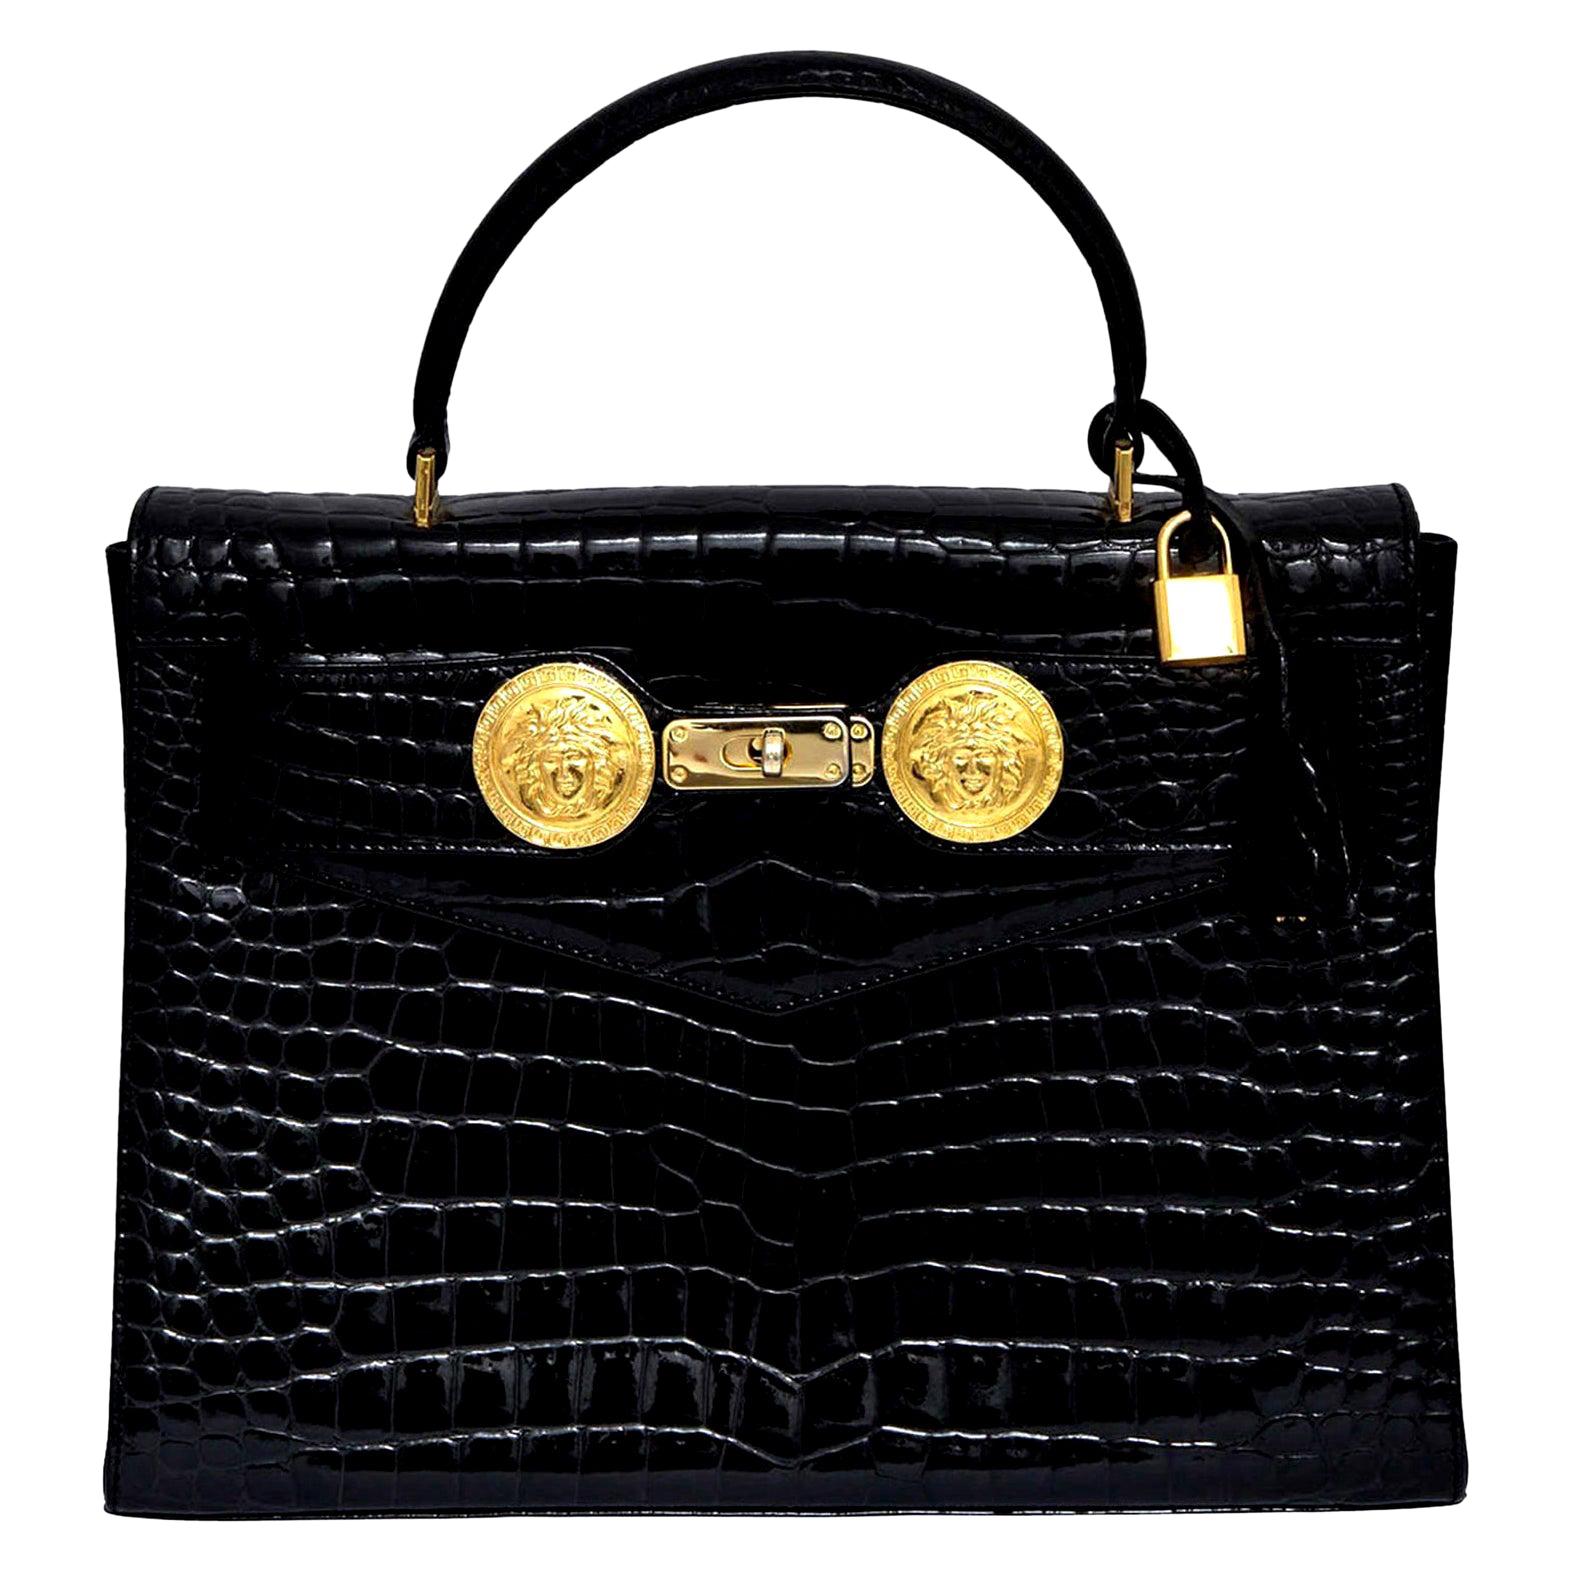 Gianni Versace Croc Embossed Couture Bag With Medusas For Sale